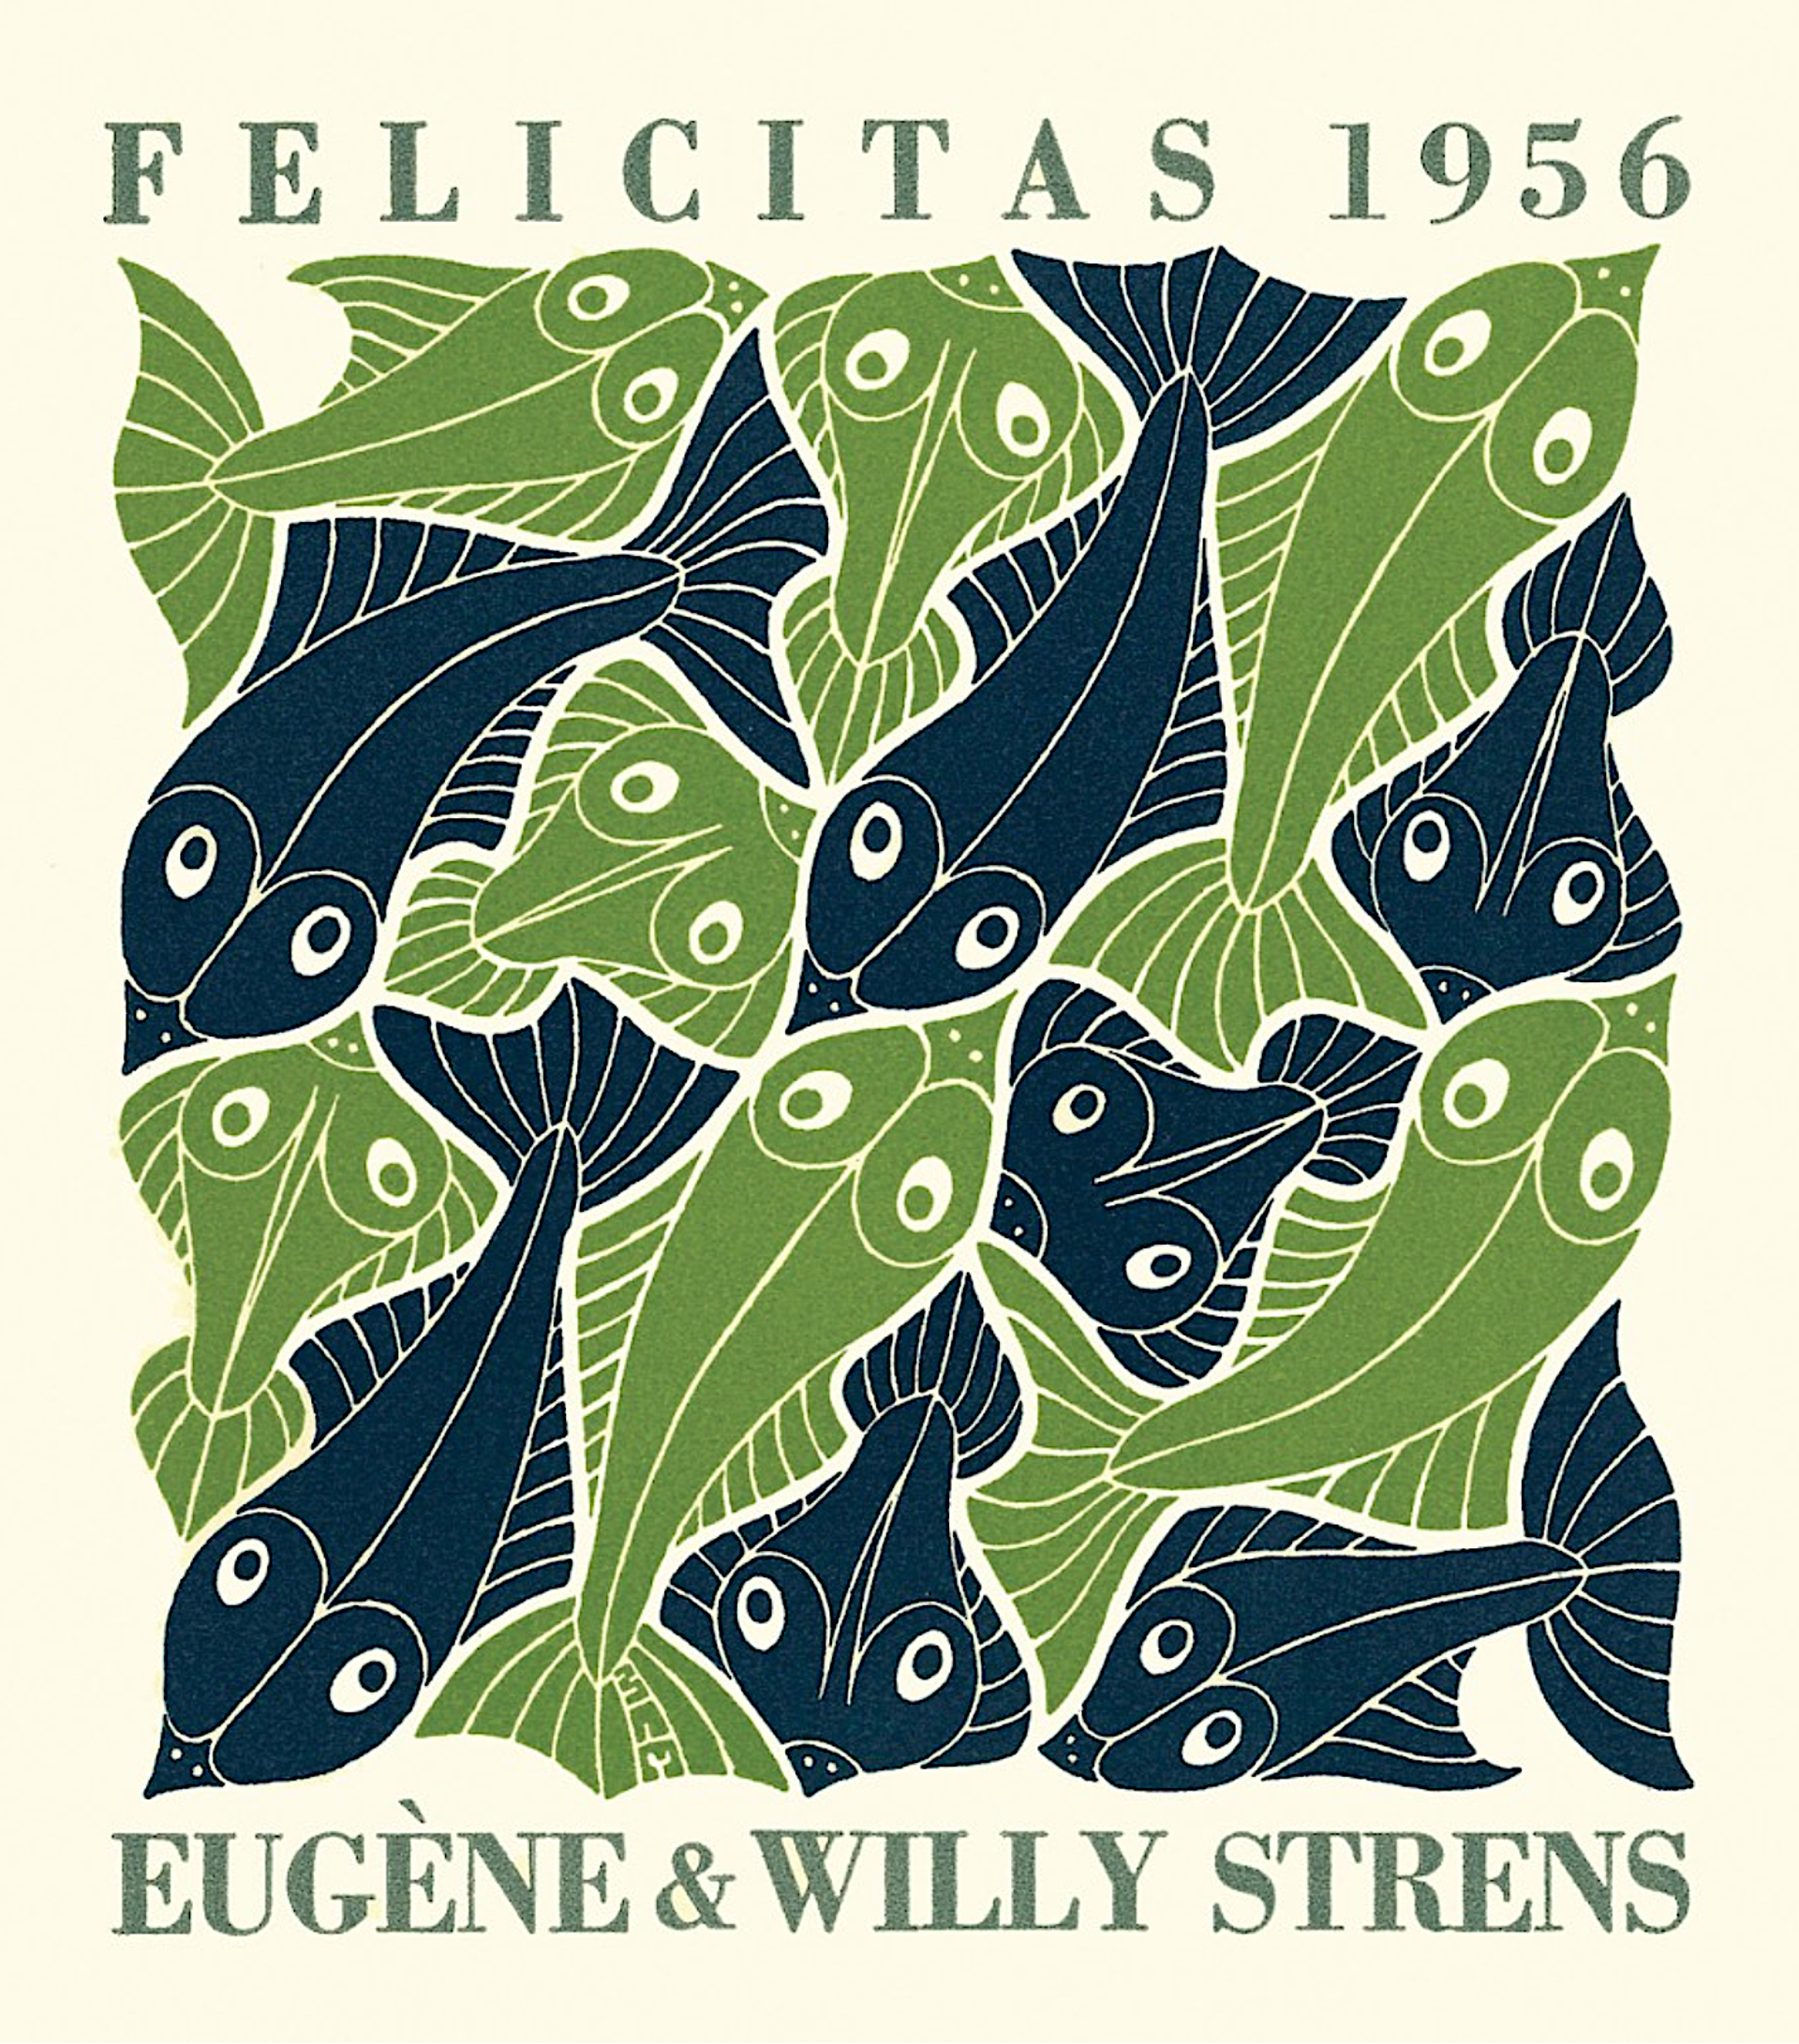 Water - Strens New Year's Greeting Card (Fish) by M.C. Escher